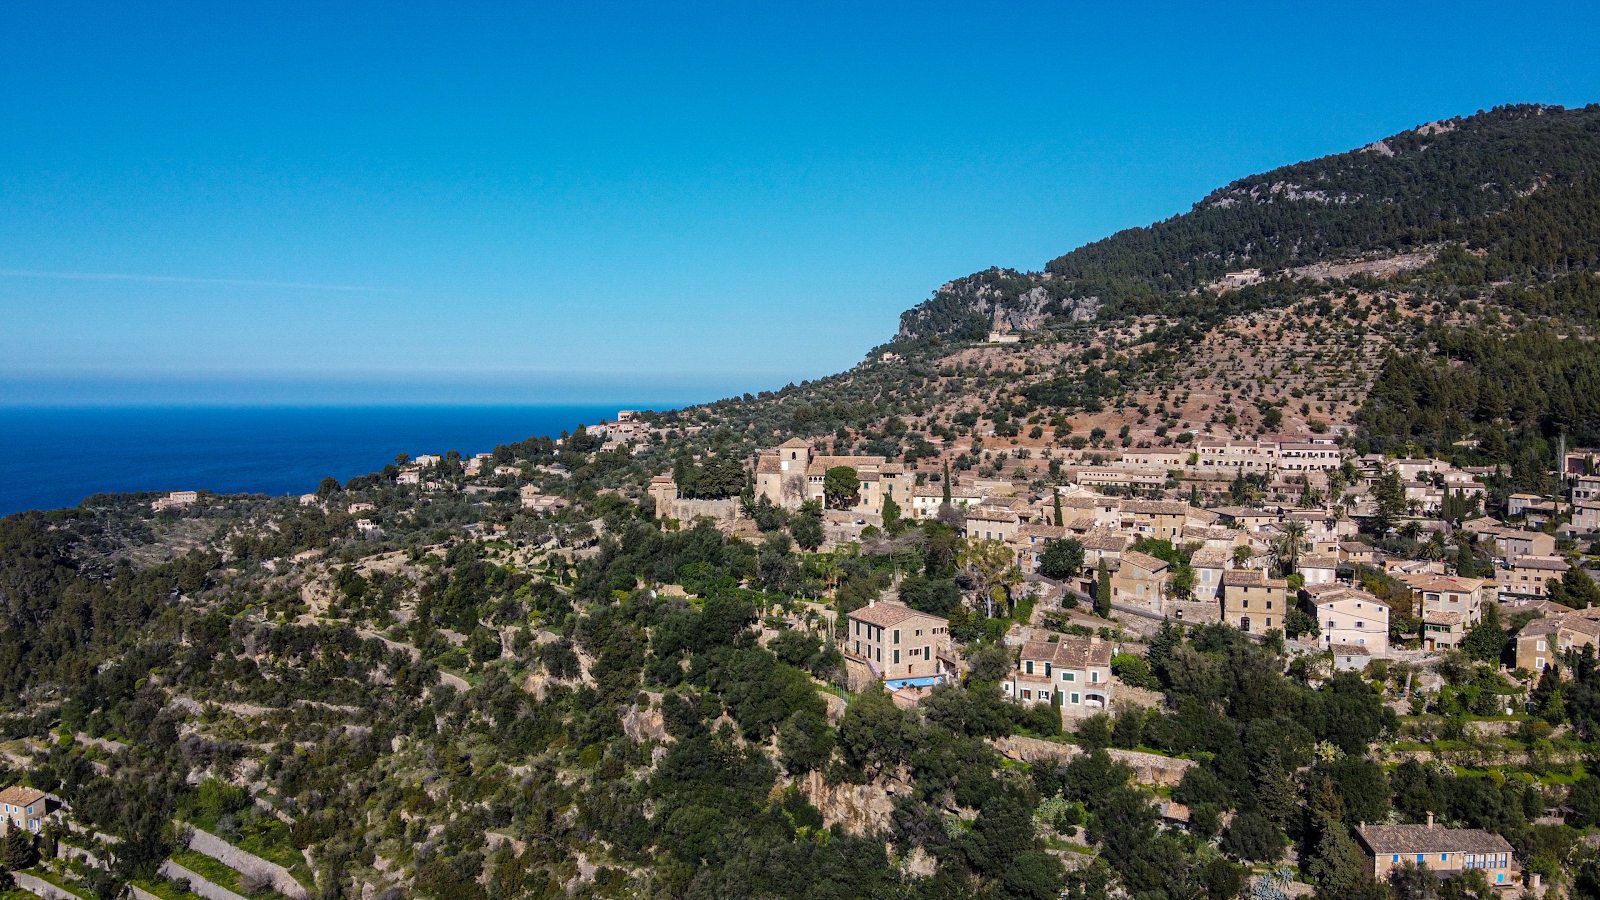 A Panoramic View of Deia Village